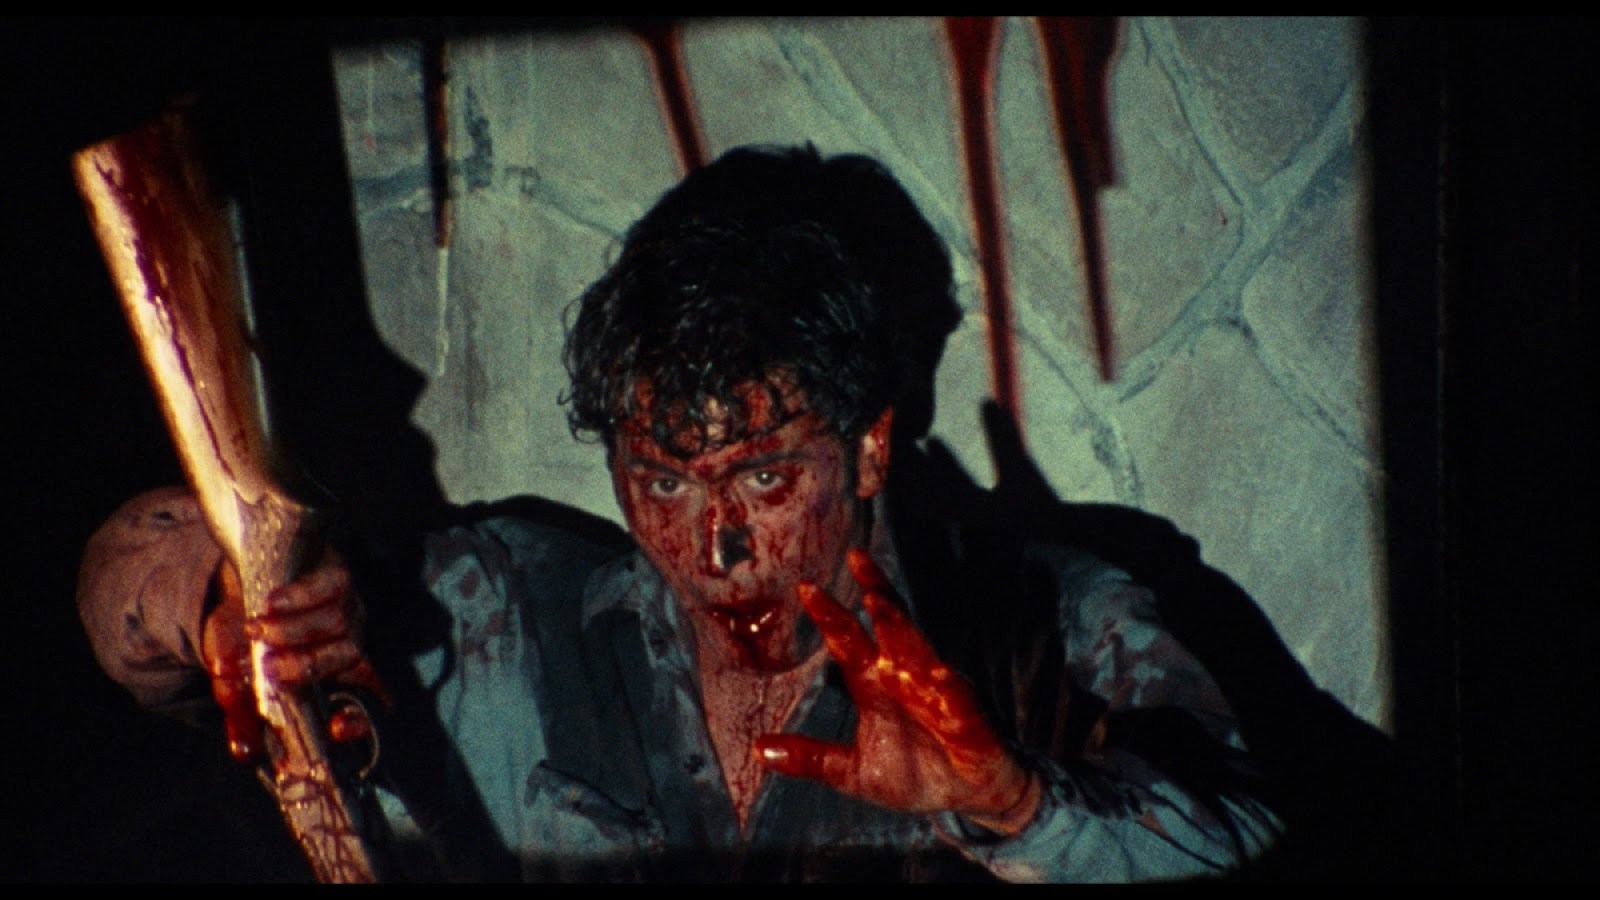 Bloodied up Ash in The Evil Dead